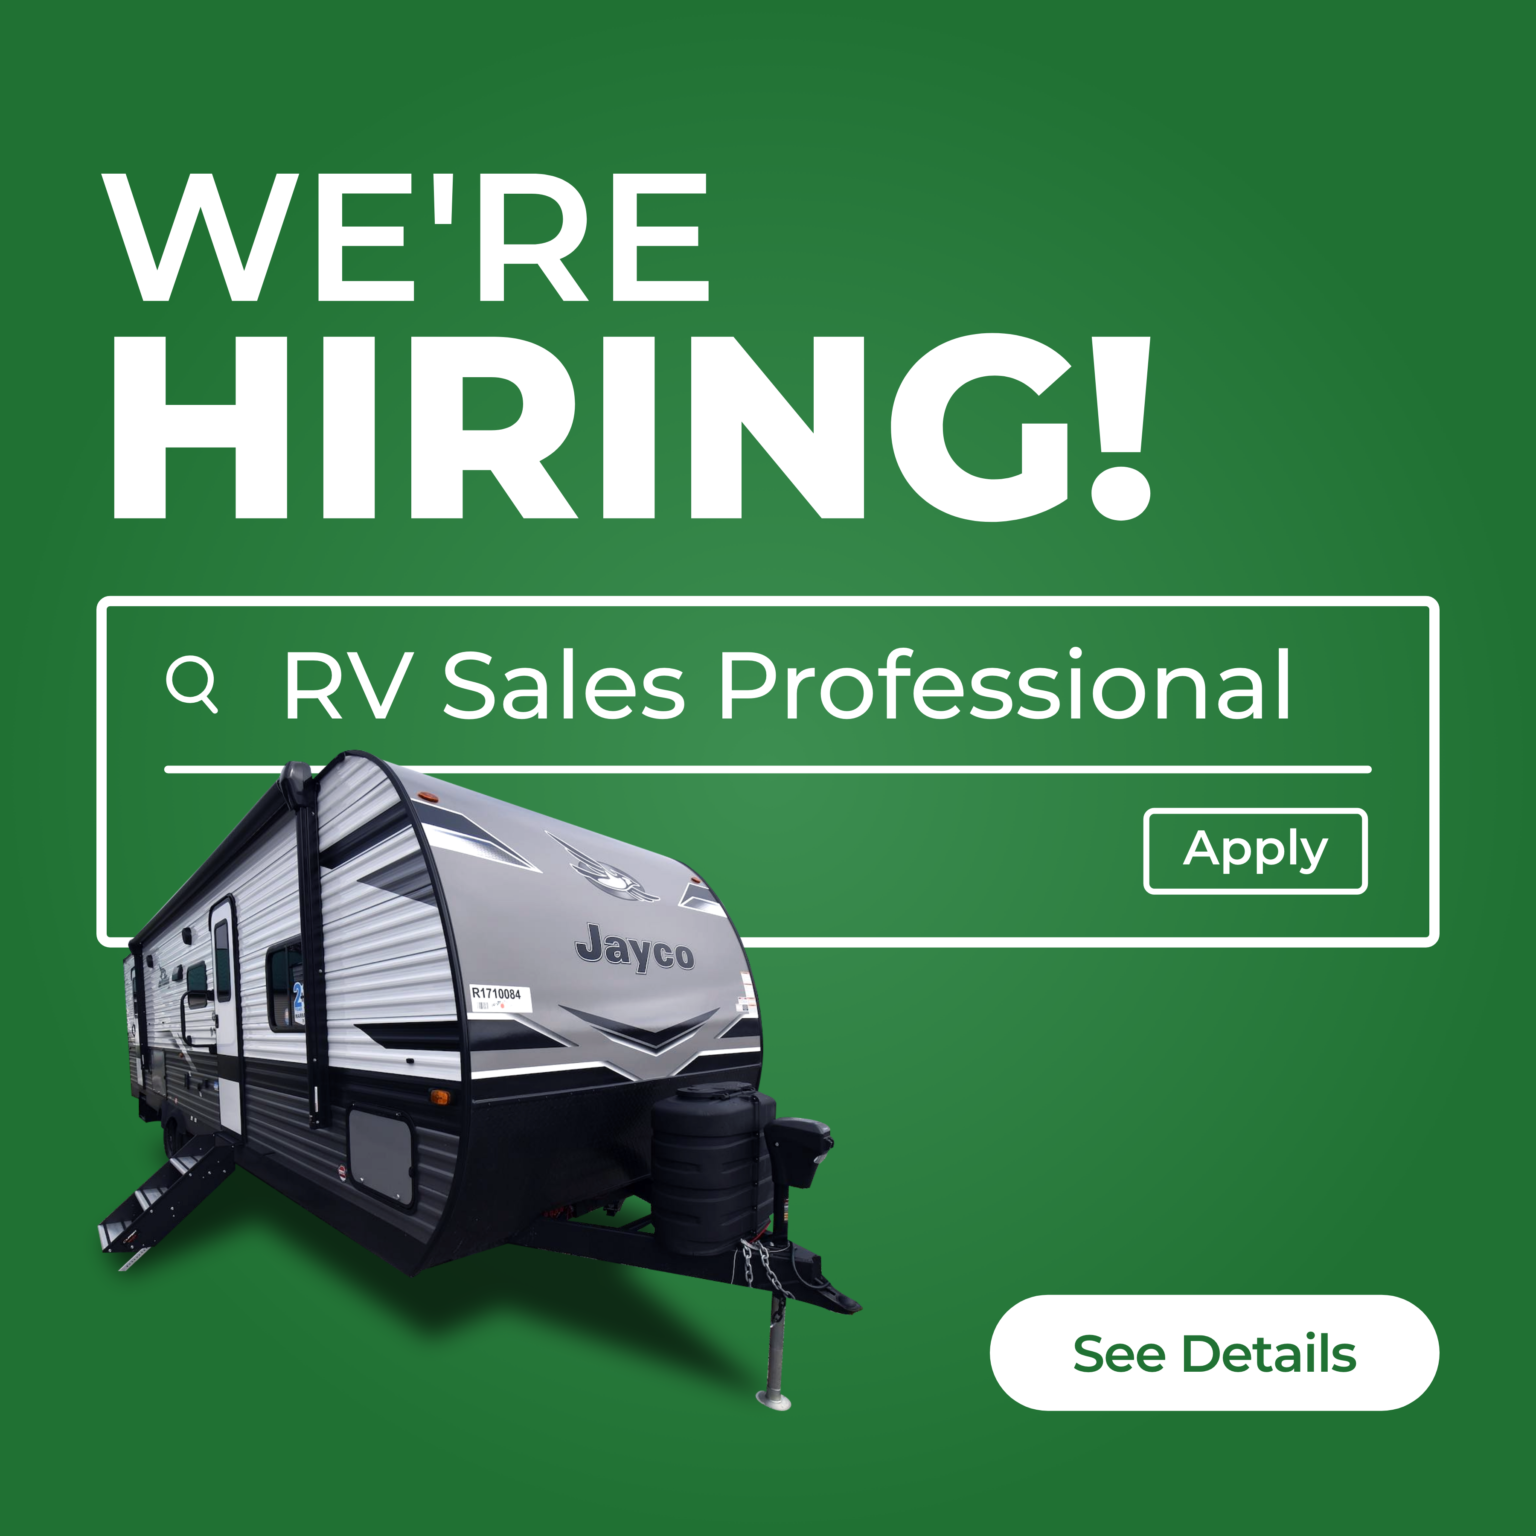 We're Hiring an RV Sales Professional